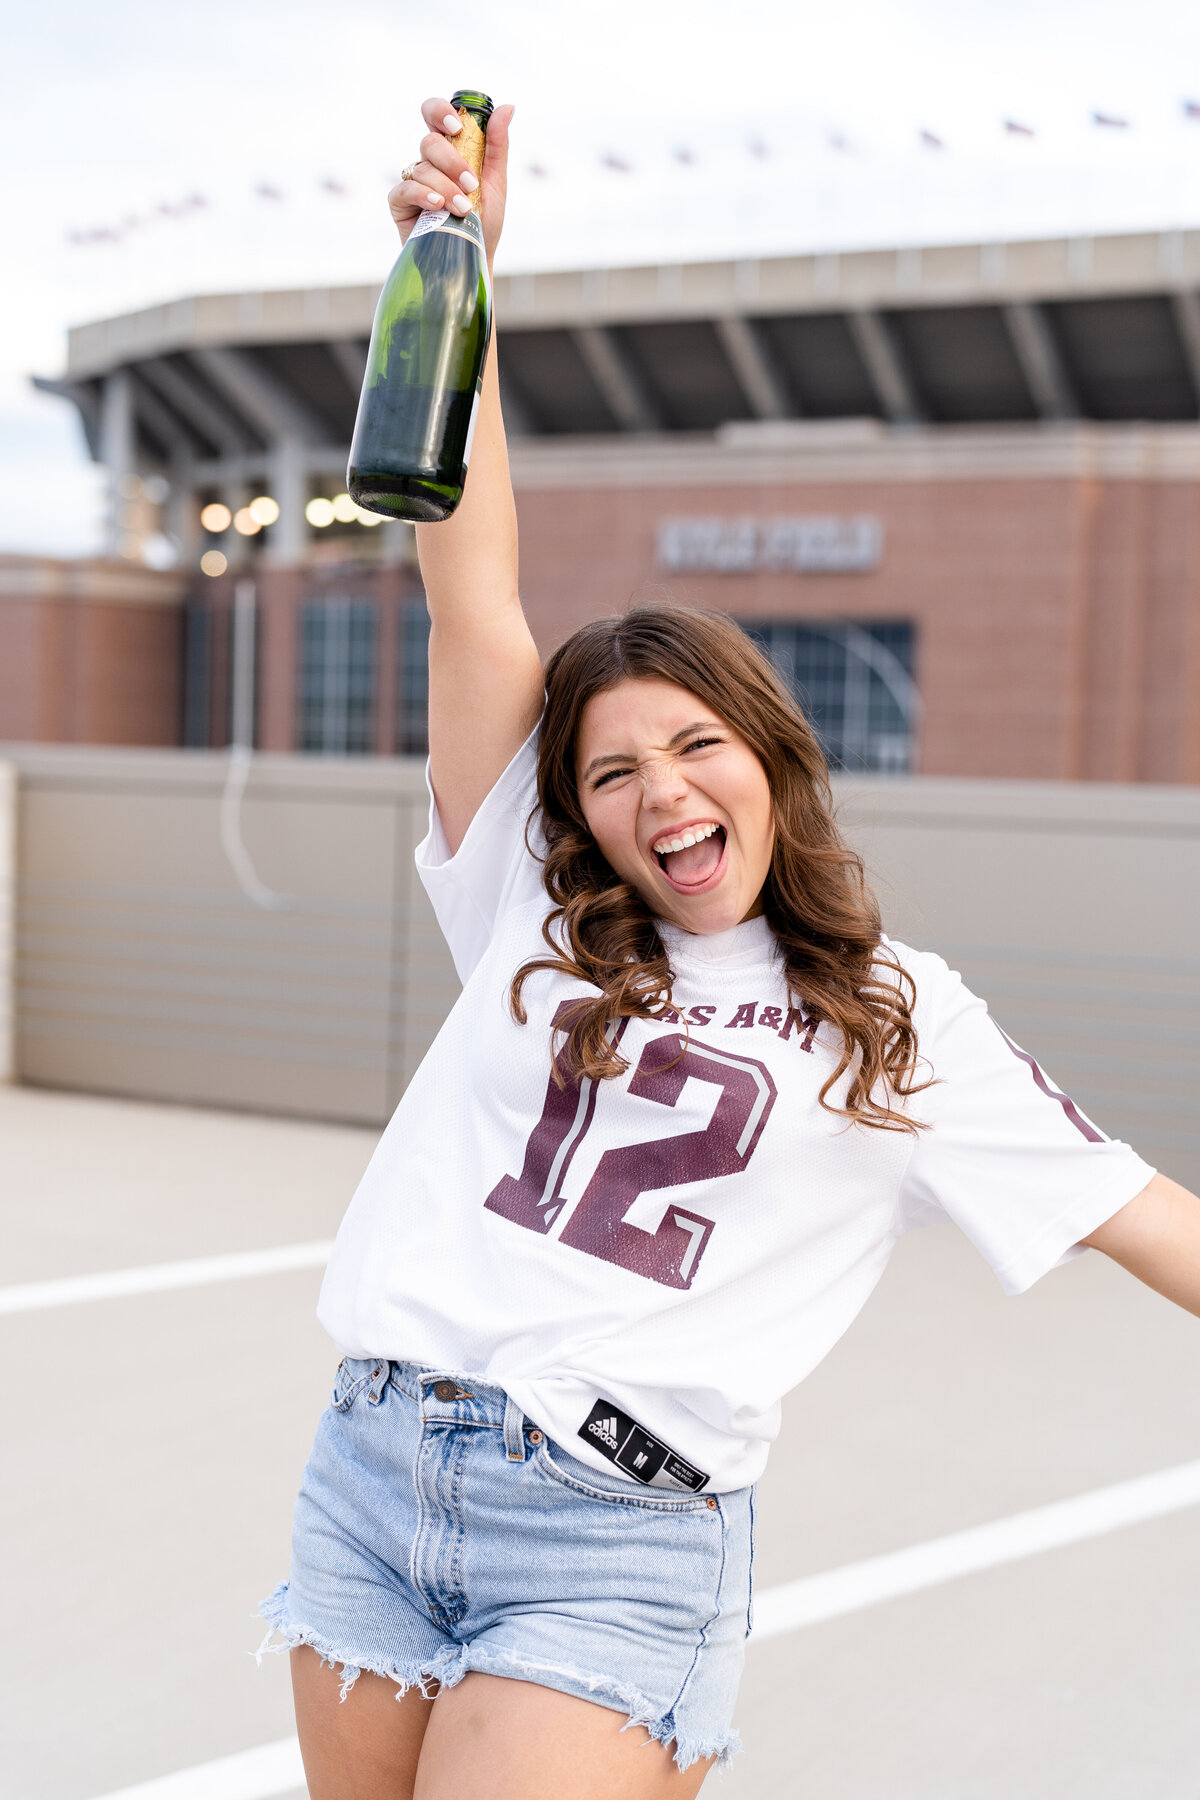 Texas A&M senior girl celebrating with champagne bottle wearing white jersey on rooftop garage in front of Kyle Field